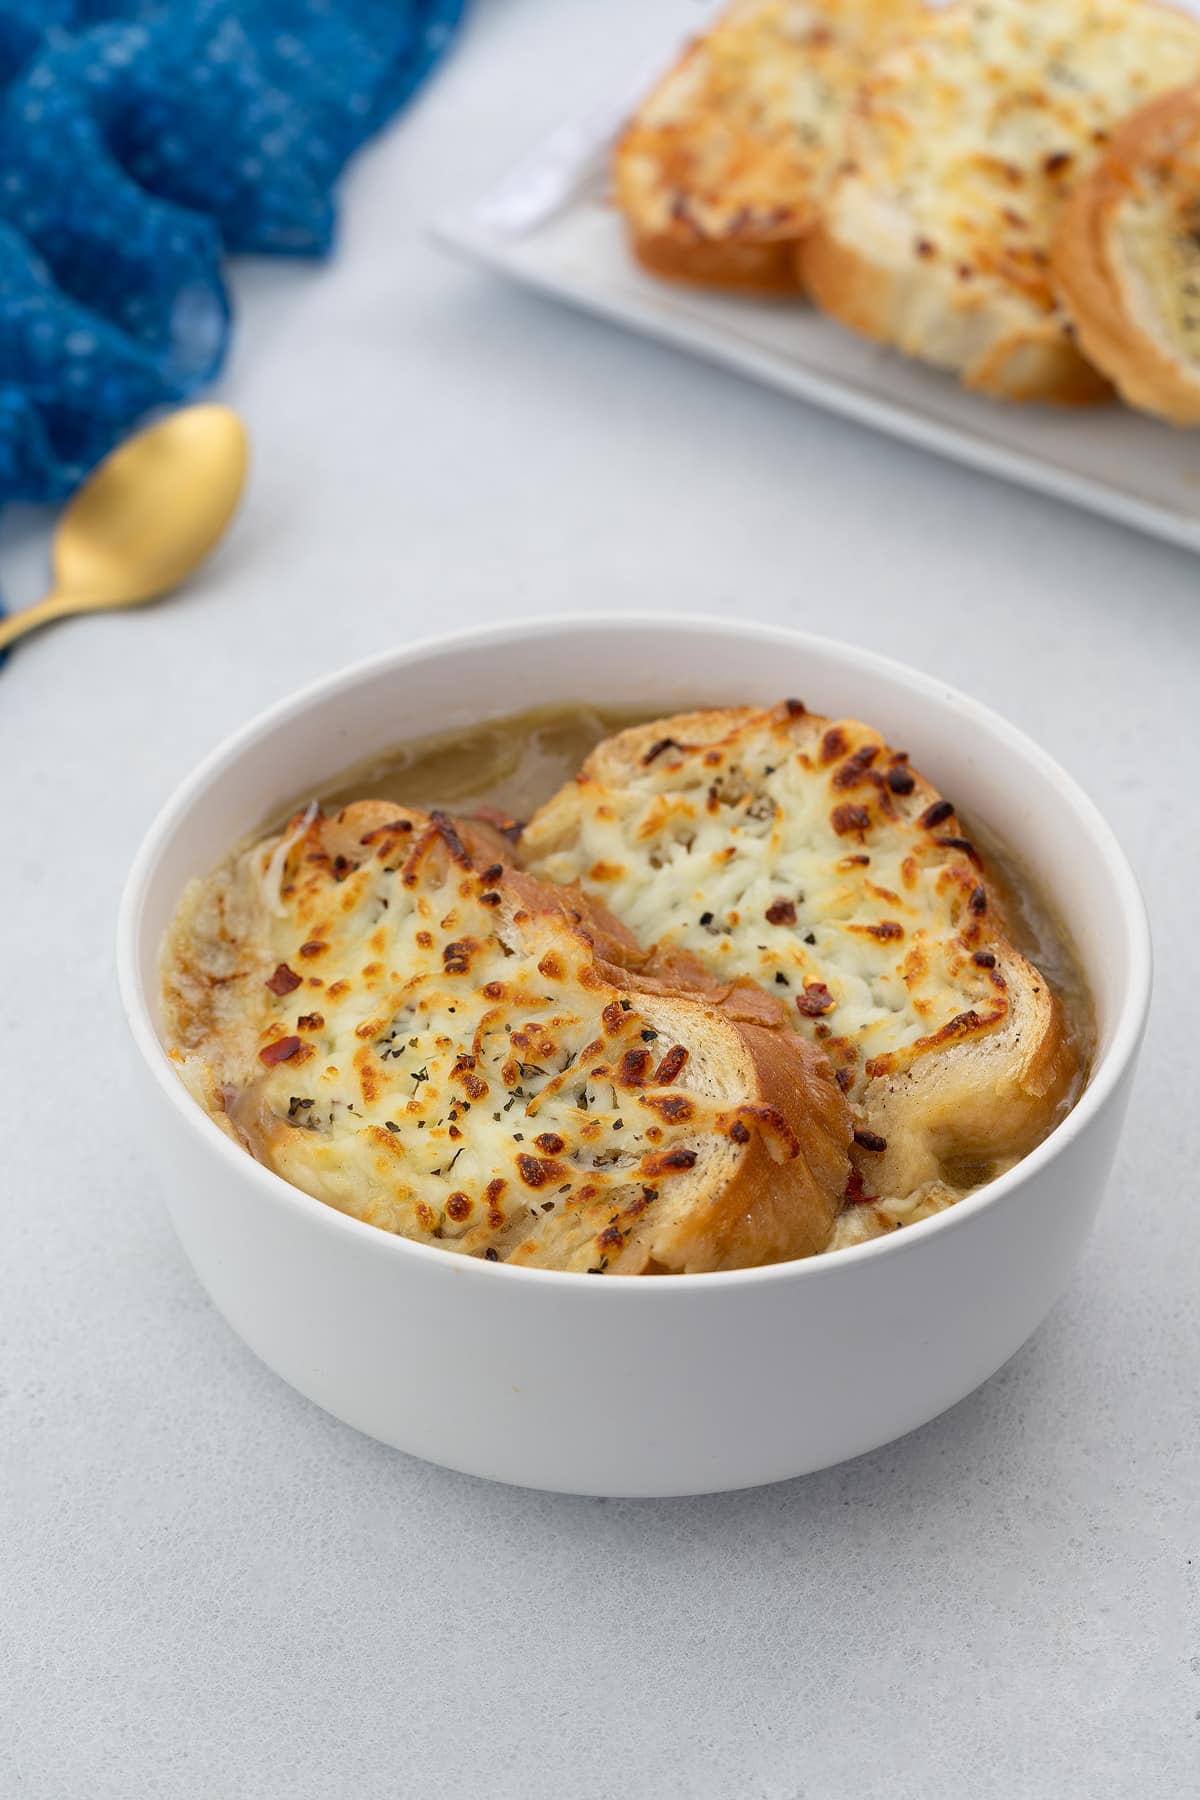 Homemade French onion soup served in a white bowl, garnished with crusty bread on top. The setting includes a golden fork and a blue towel arranged nearby.